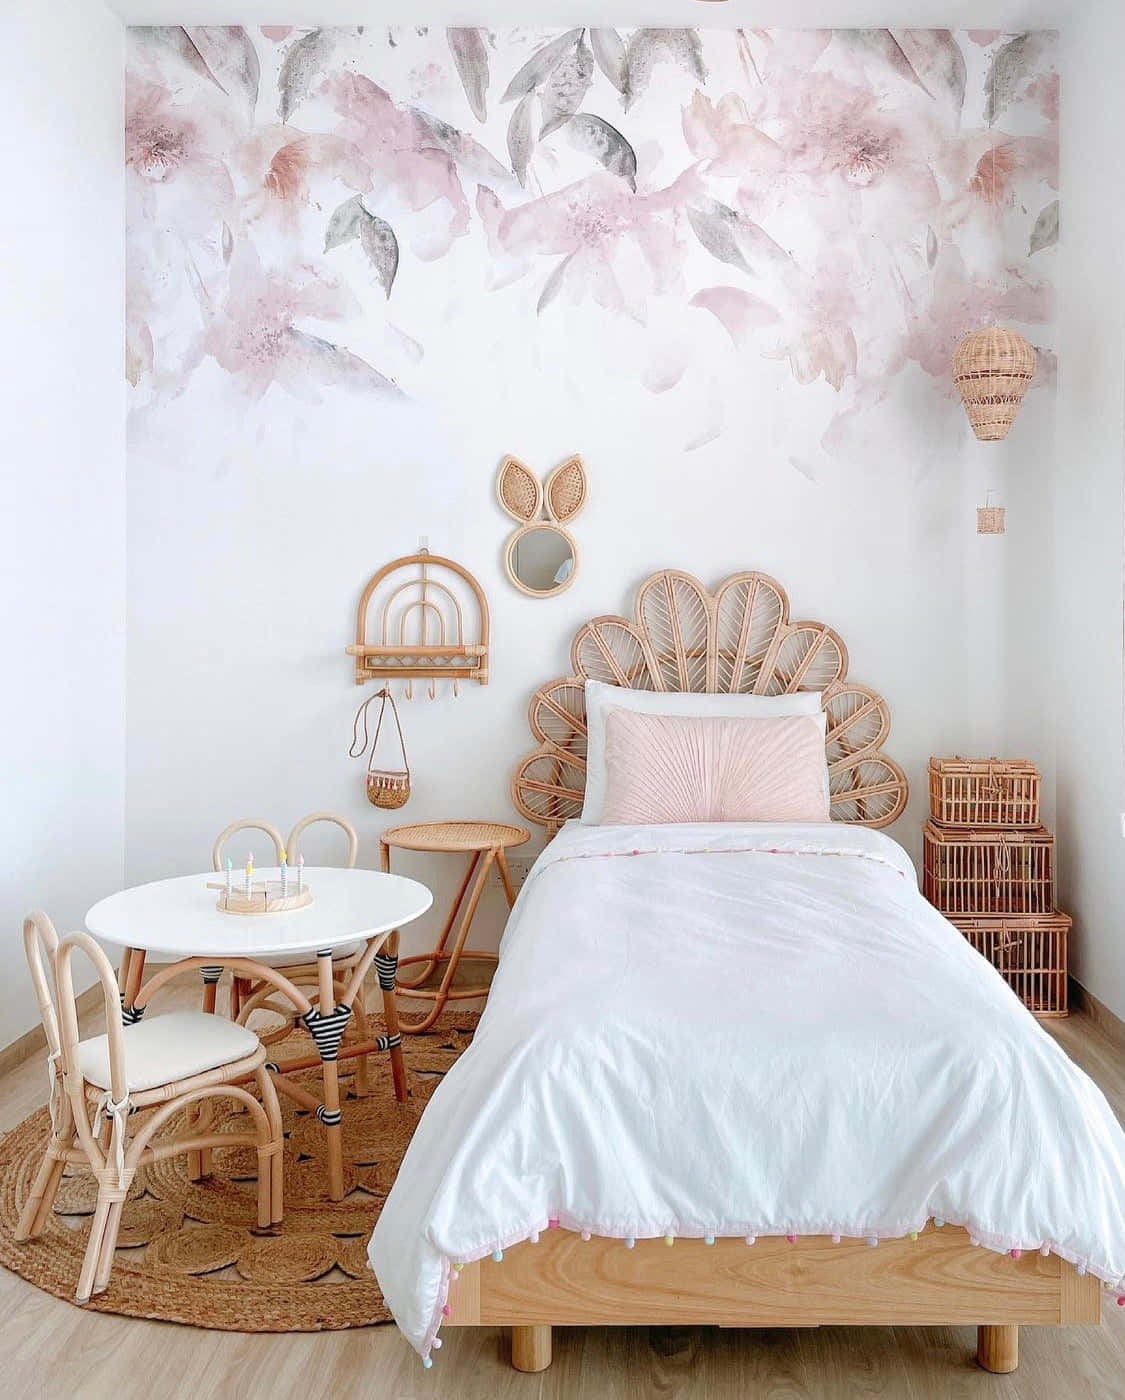 A Bedroom With A Pink And White Floral Wallpaper